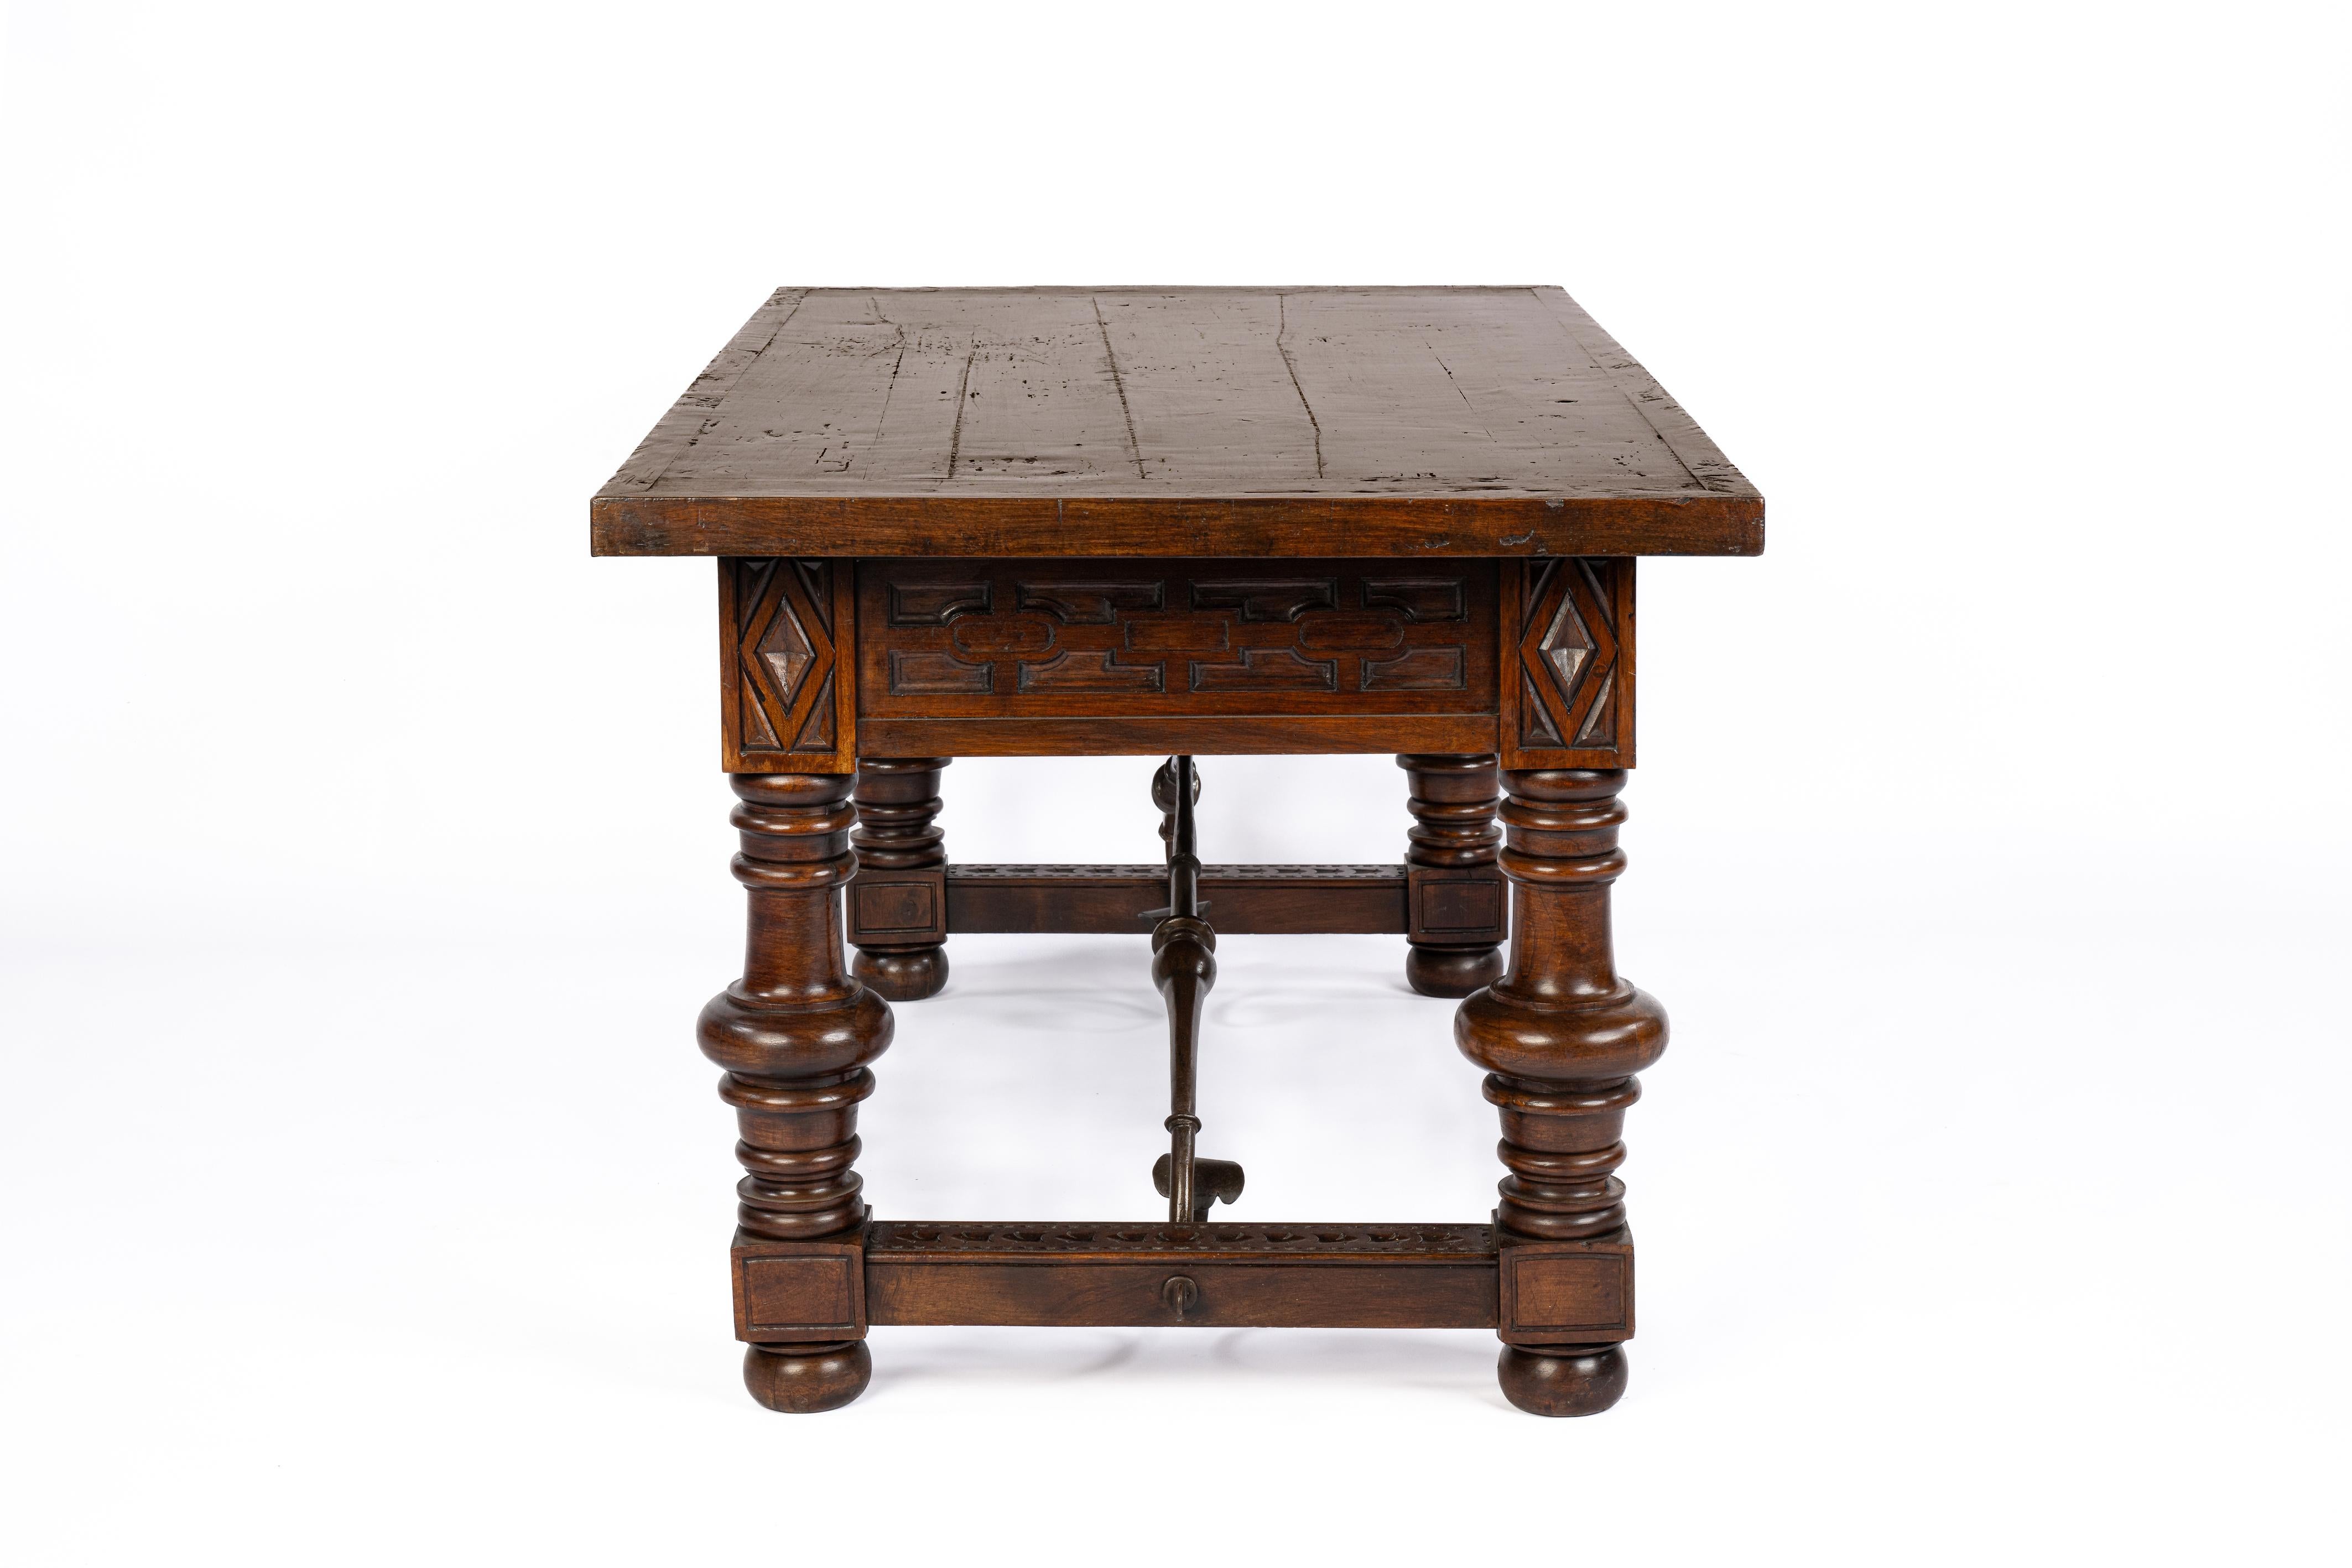 Forged Antique Spanish Baroque Chestnut writing table or desk with turned legs For Sale